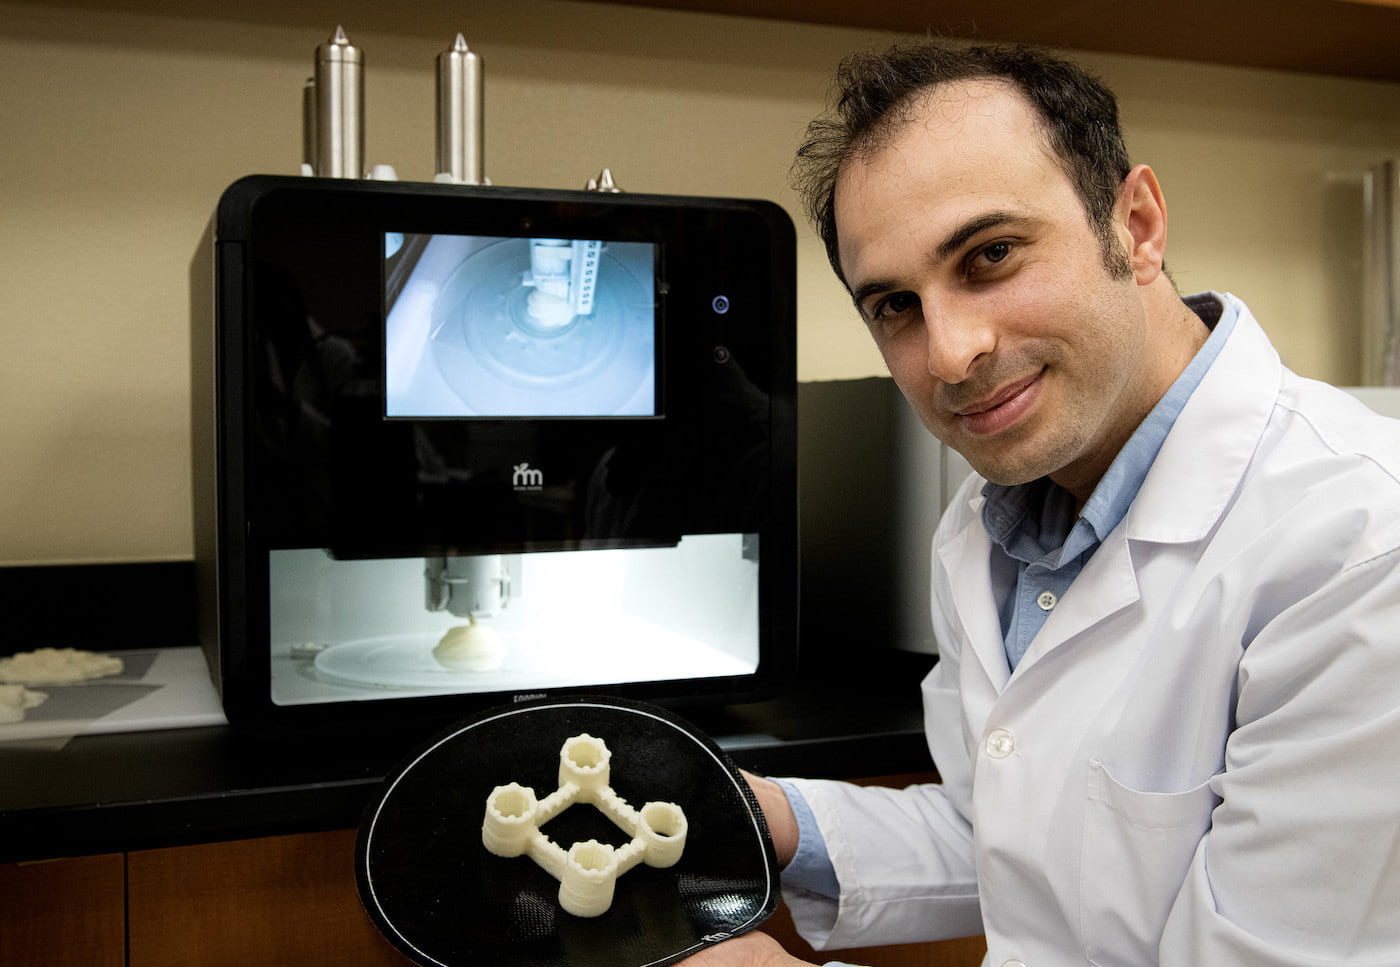 NUTRITION IN 3D — Ali Ubeyitogullari, assistant professor of food engineering, is applying nanotechnology using supercritical carbon dioxide to boost the nutritional value of 3D-printed foods. (U of A System Division of Agriculture photo by Fred Miller)